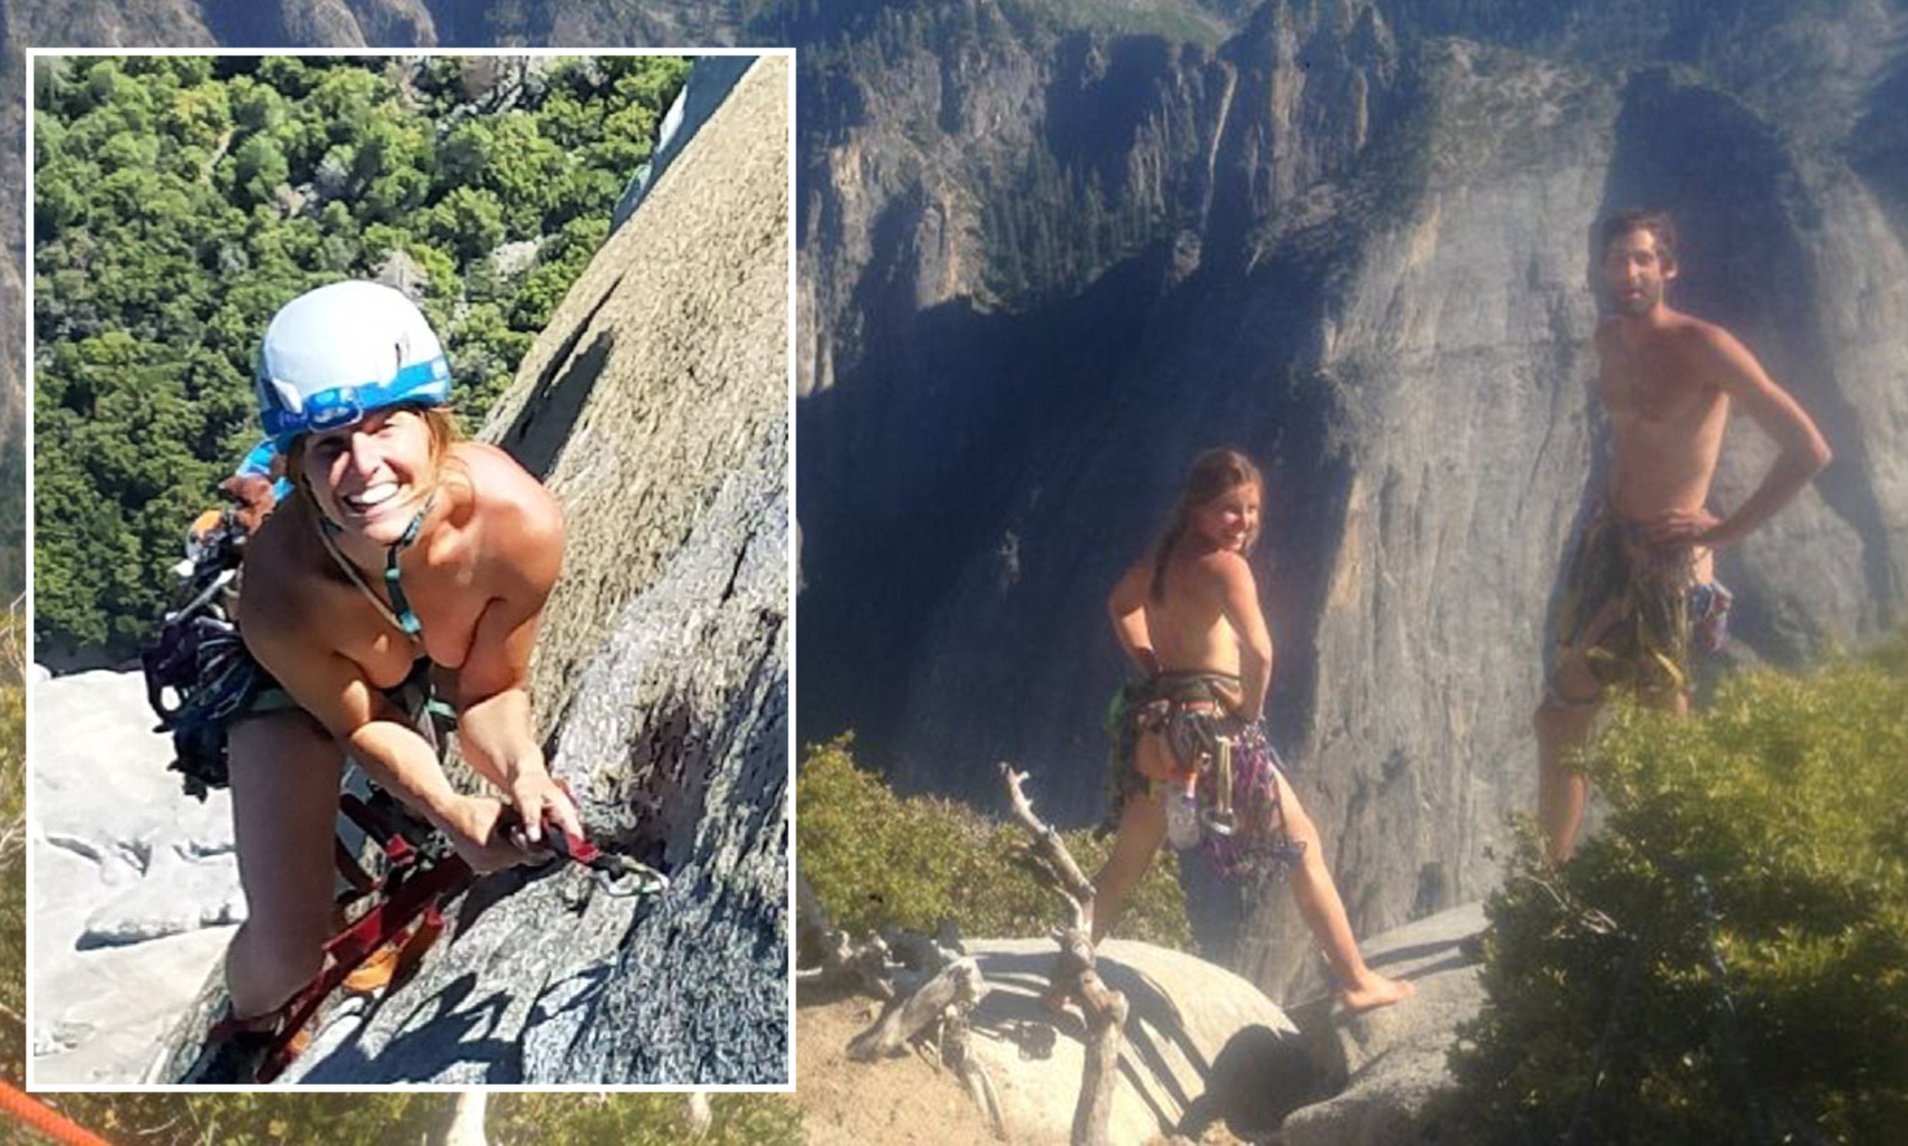 april shenberger recommends naked rock climbing pic